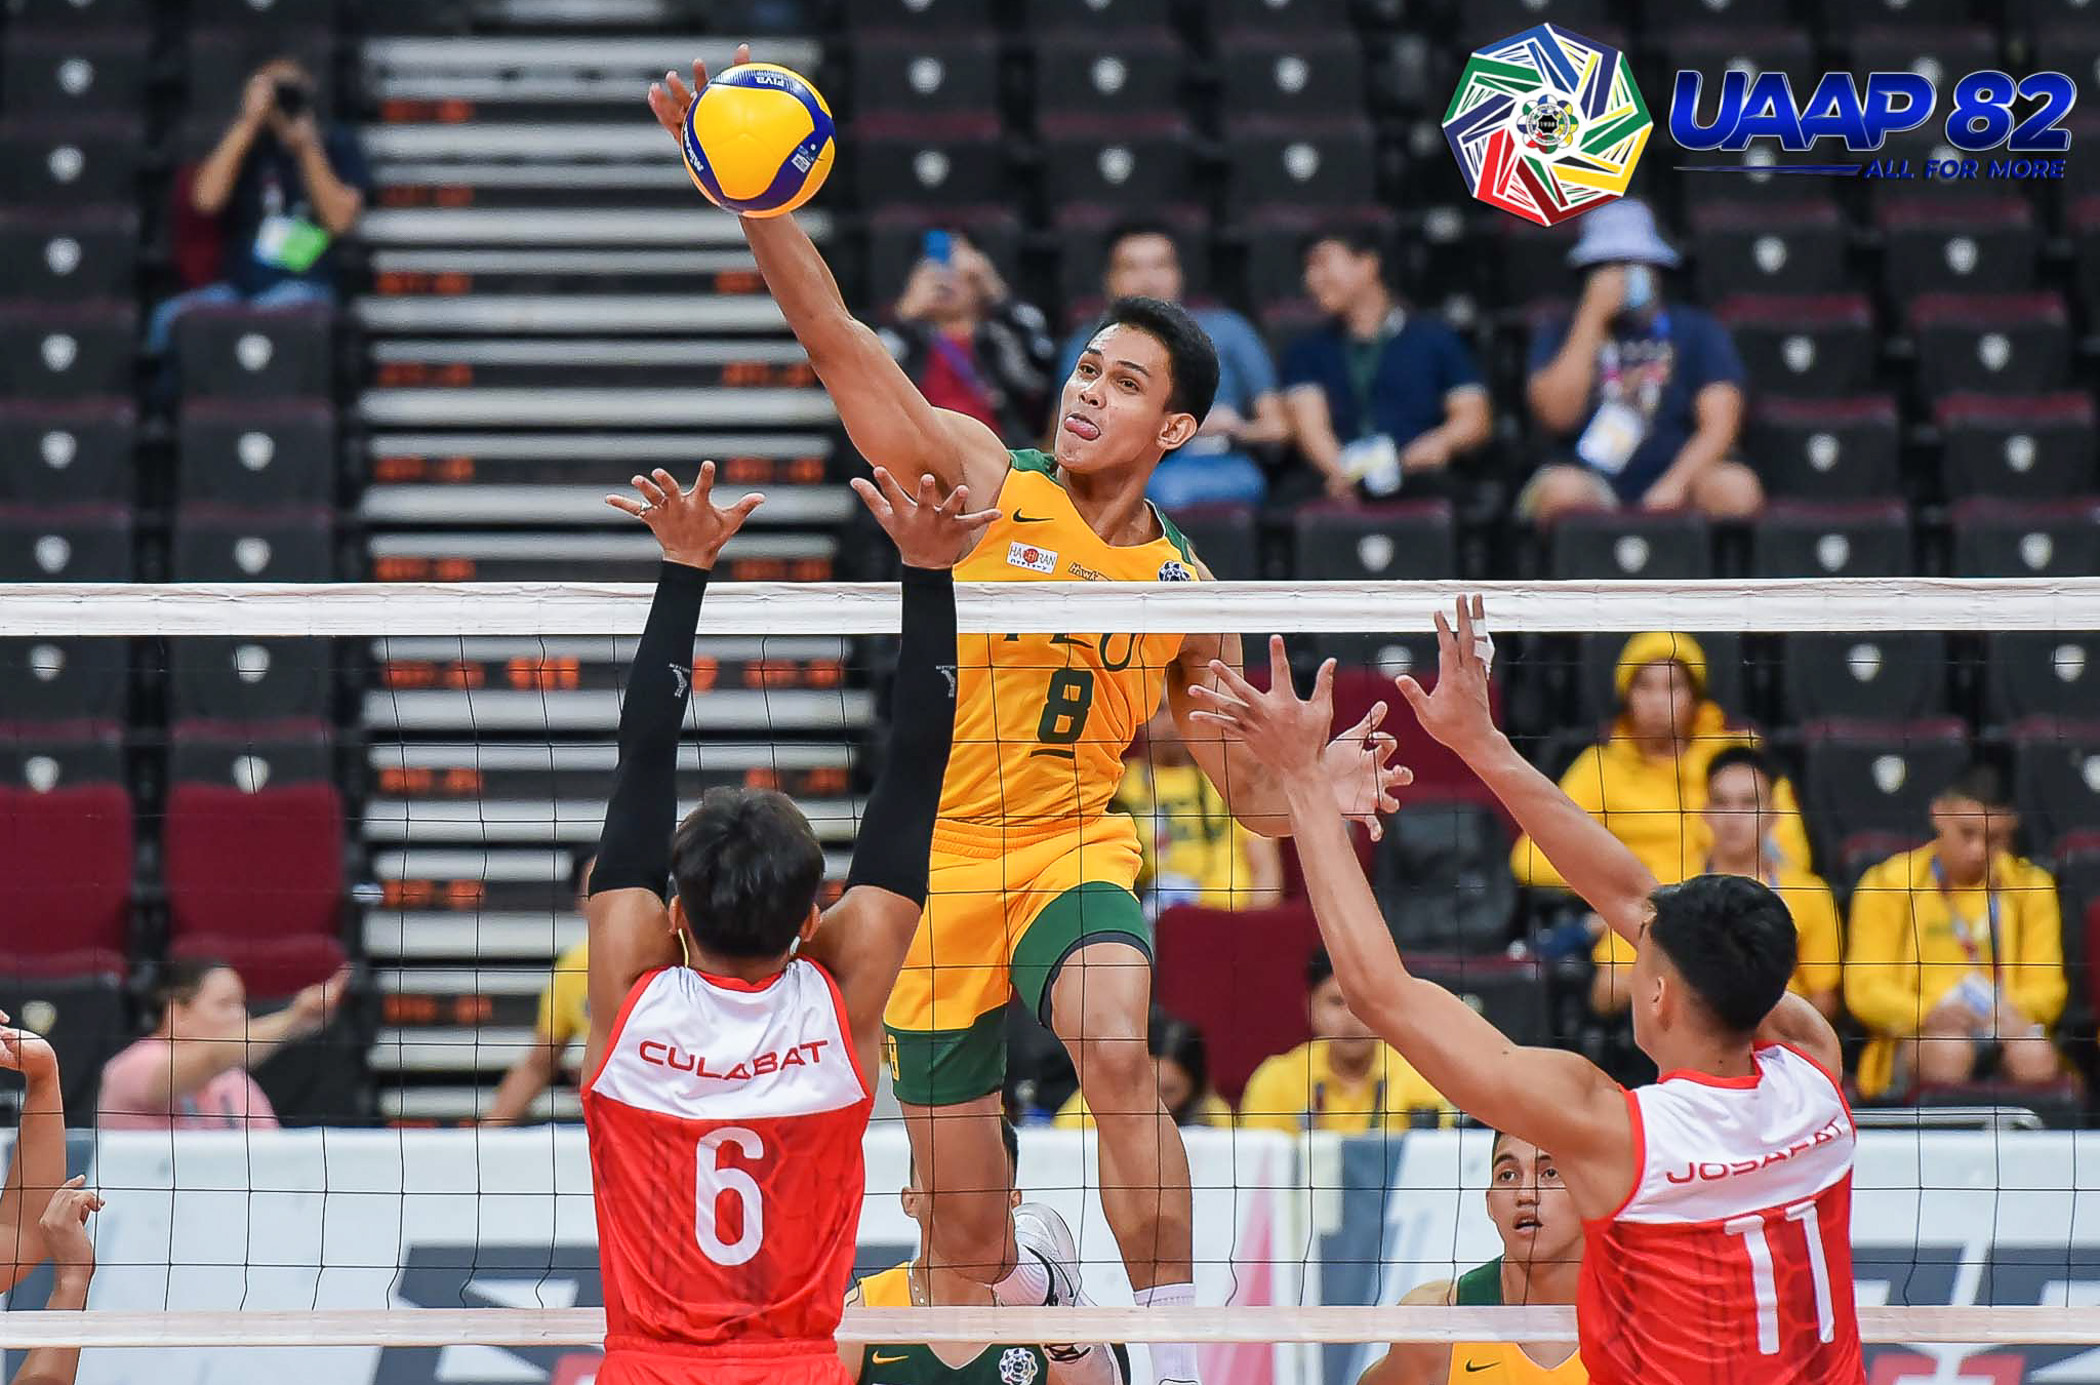 FEU takes down UE for first win in UAAP men’s volleyball